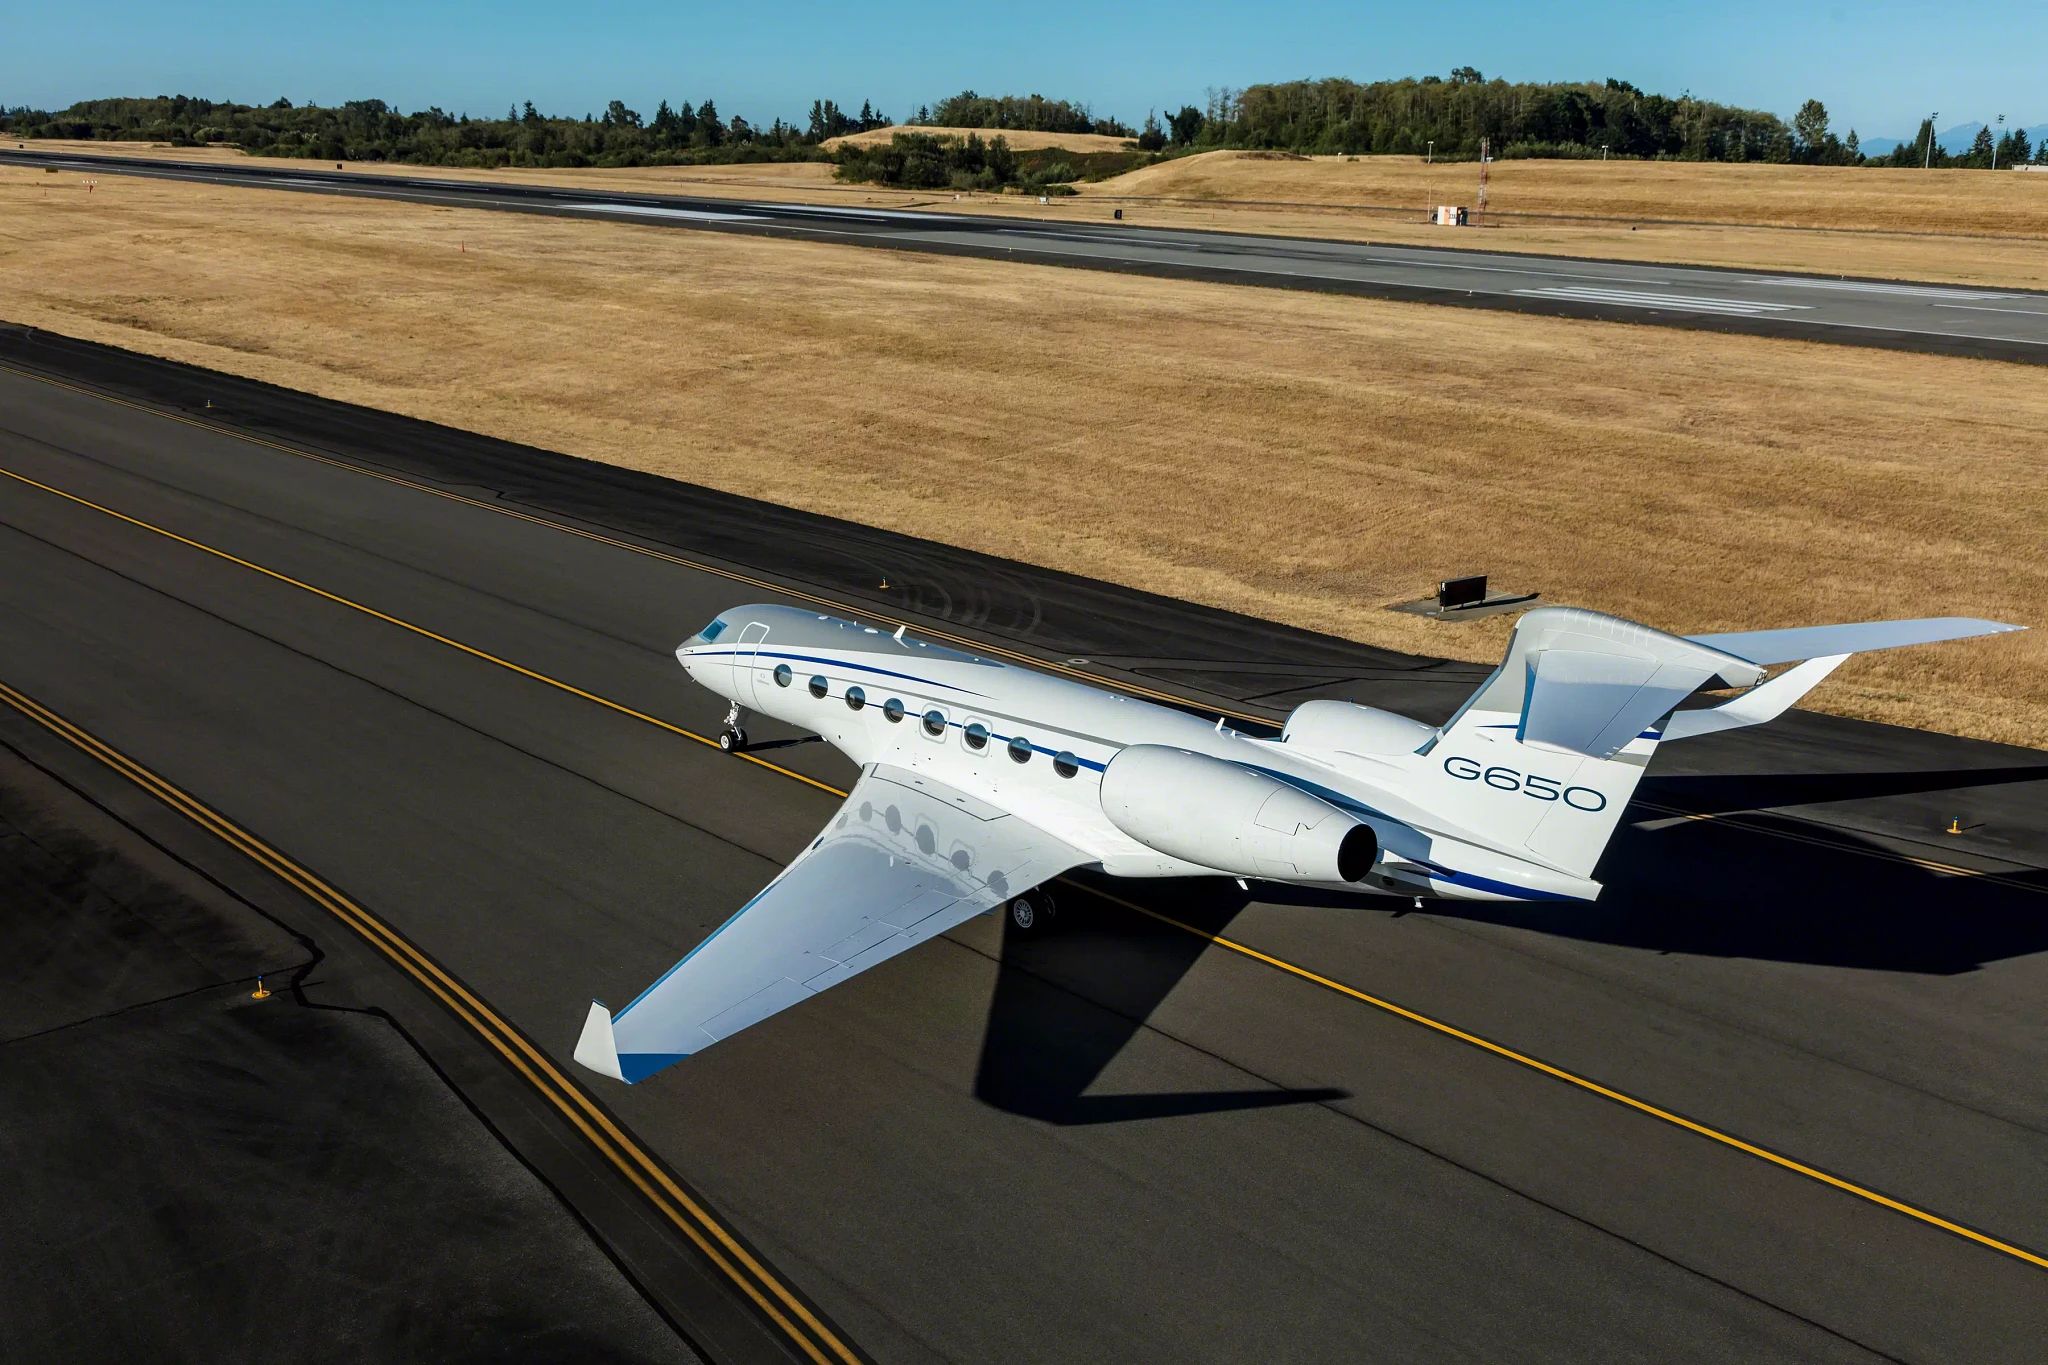 A Gulfstream G650 lined up on a runway.